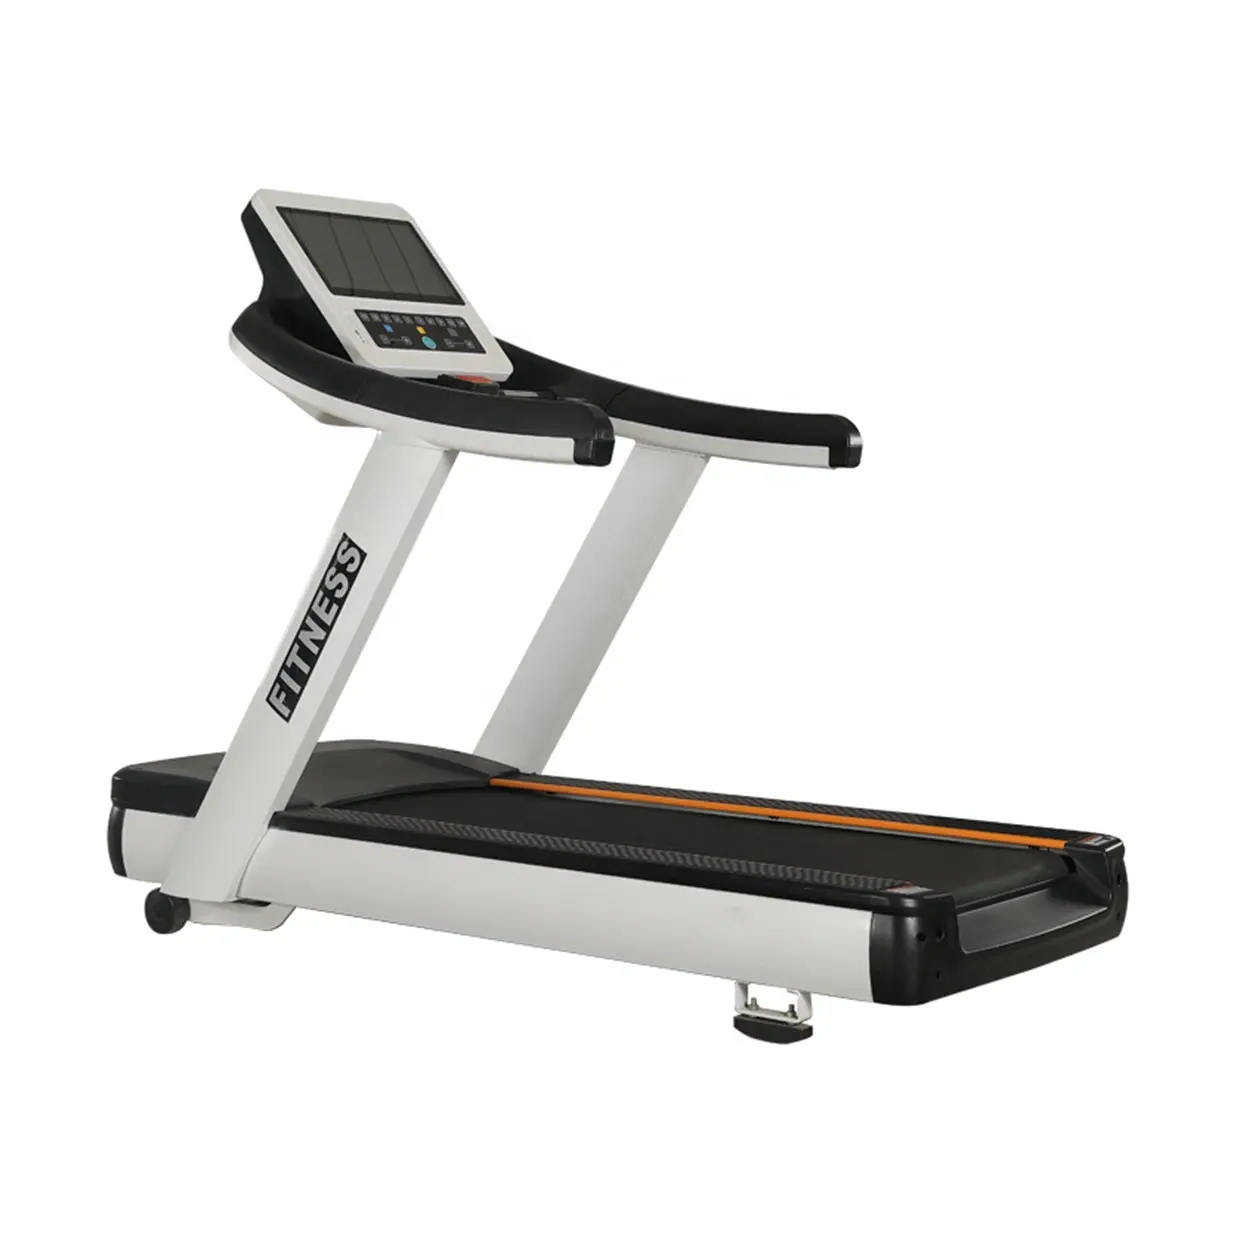 Hot Sale Gym Fitness Equipment Motorized Manual Touch Screen Treadmill Multi Function Running Machine